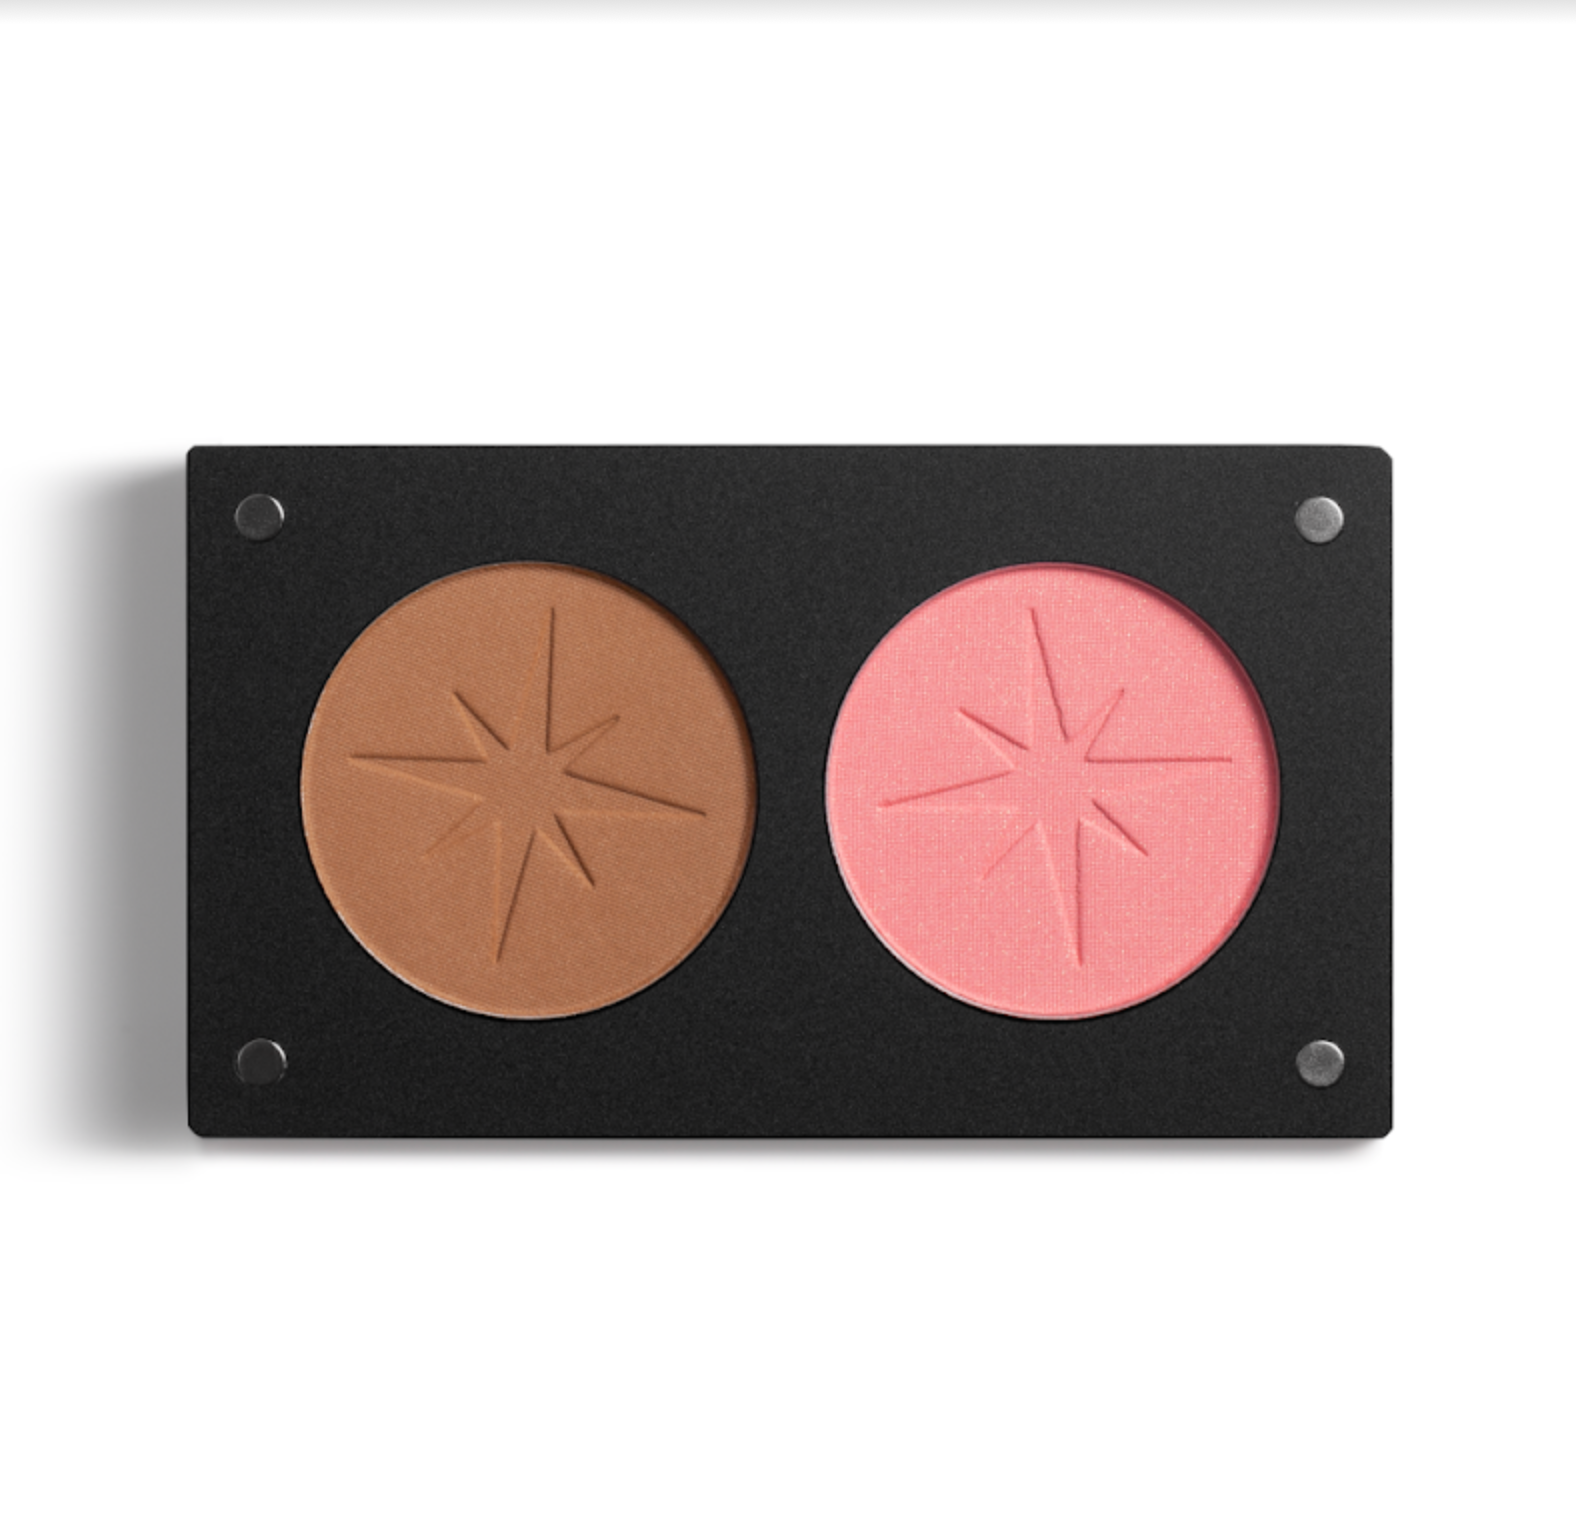 INGLOT X MAURA Bask in the Glow Duo Palettes Sunrise